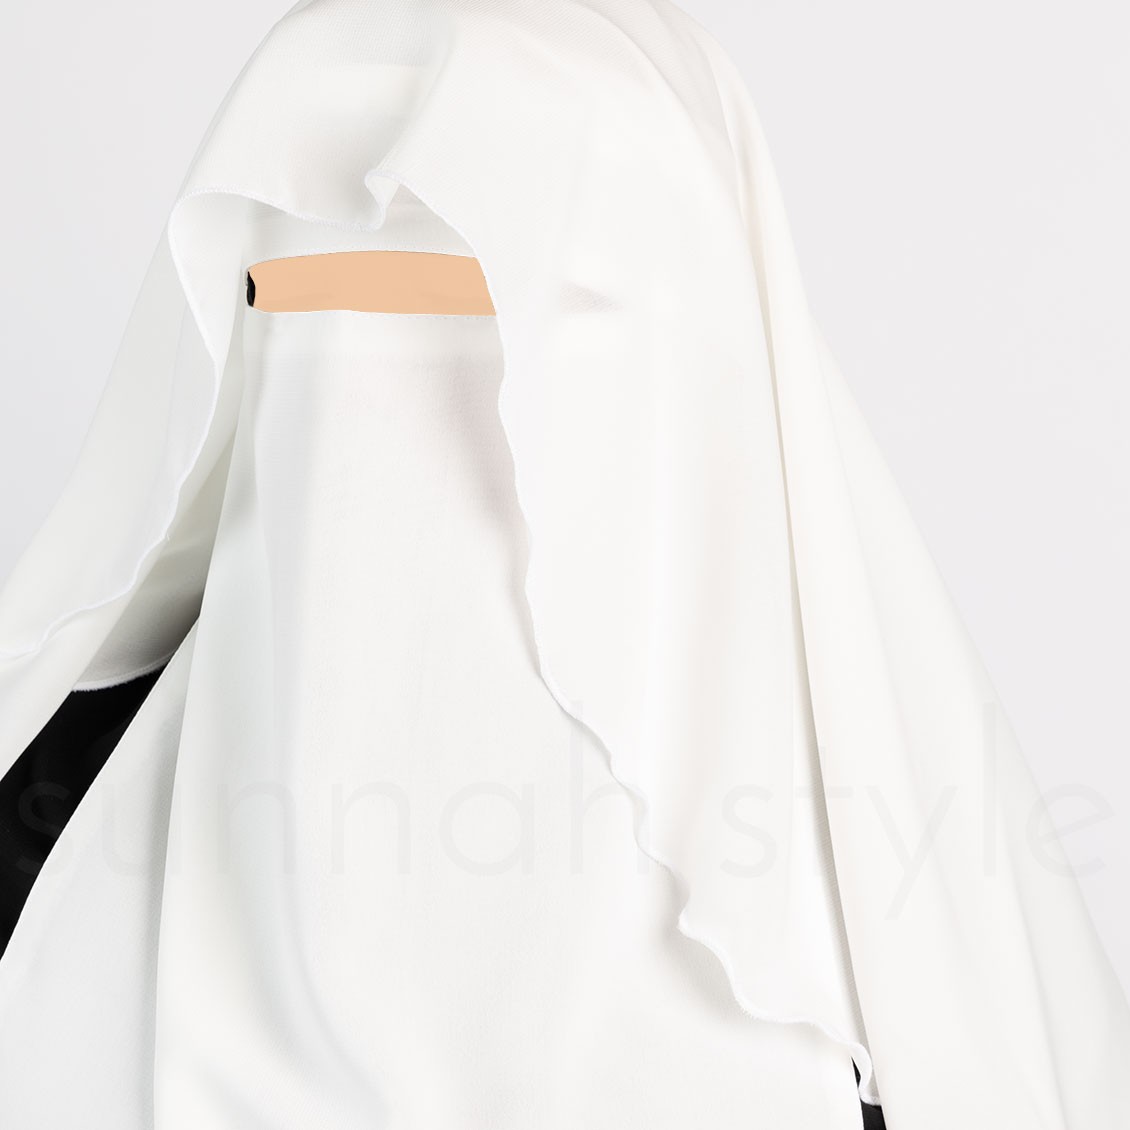 Sunnah Style Butterfly Niqab White